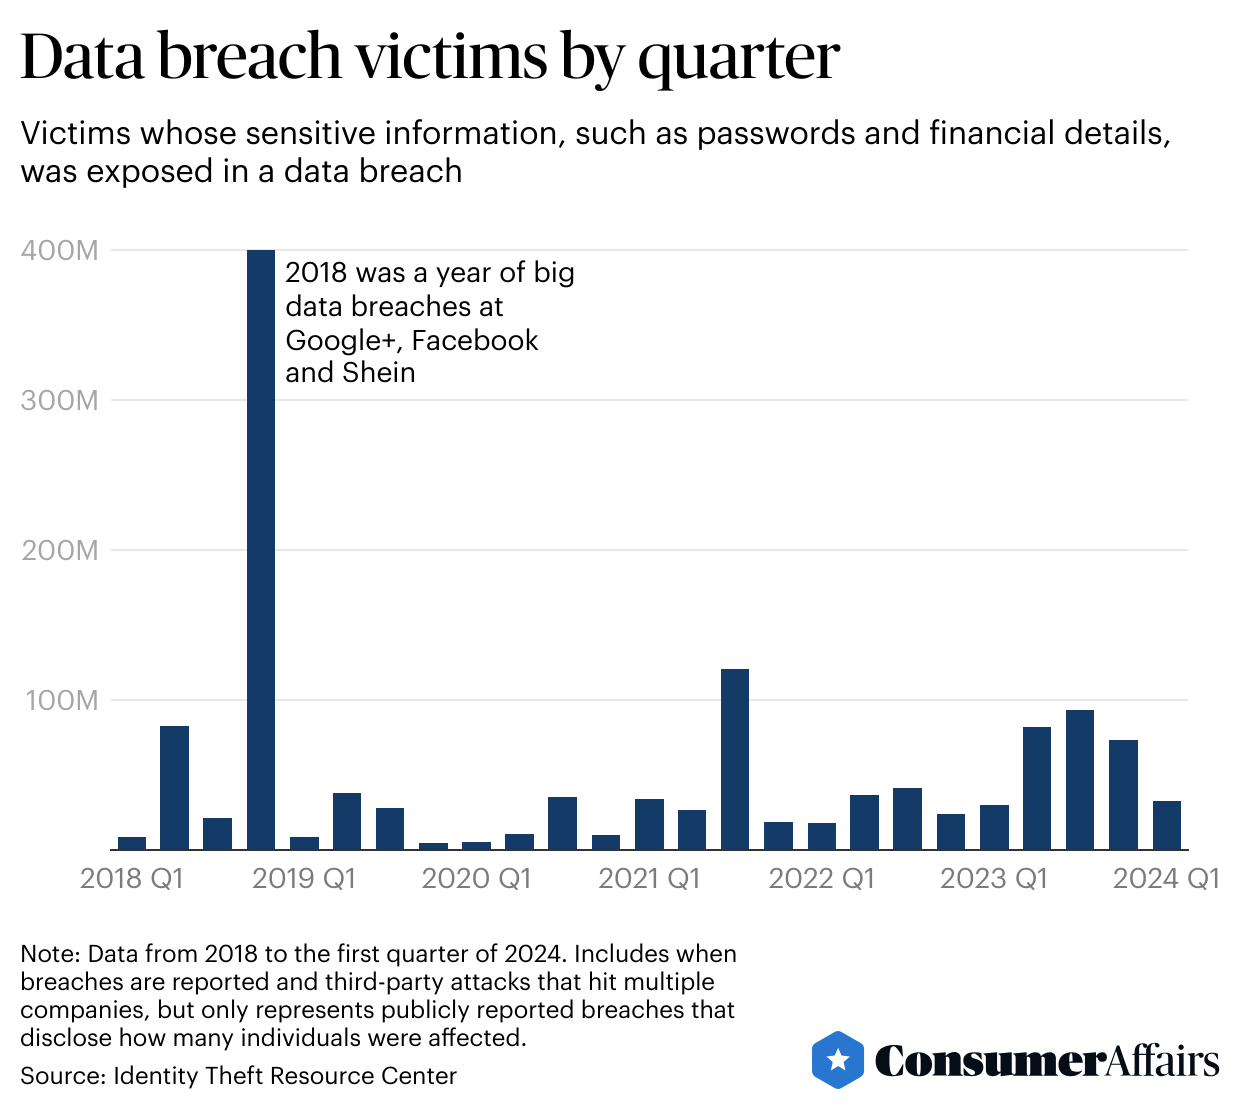 Graph showing results of “Data breach victims by quarter”.